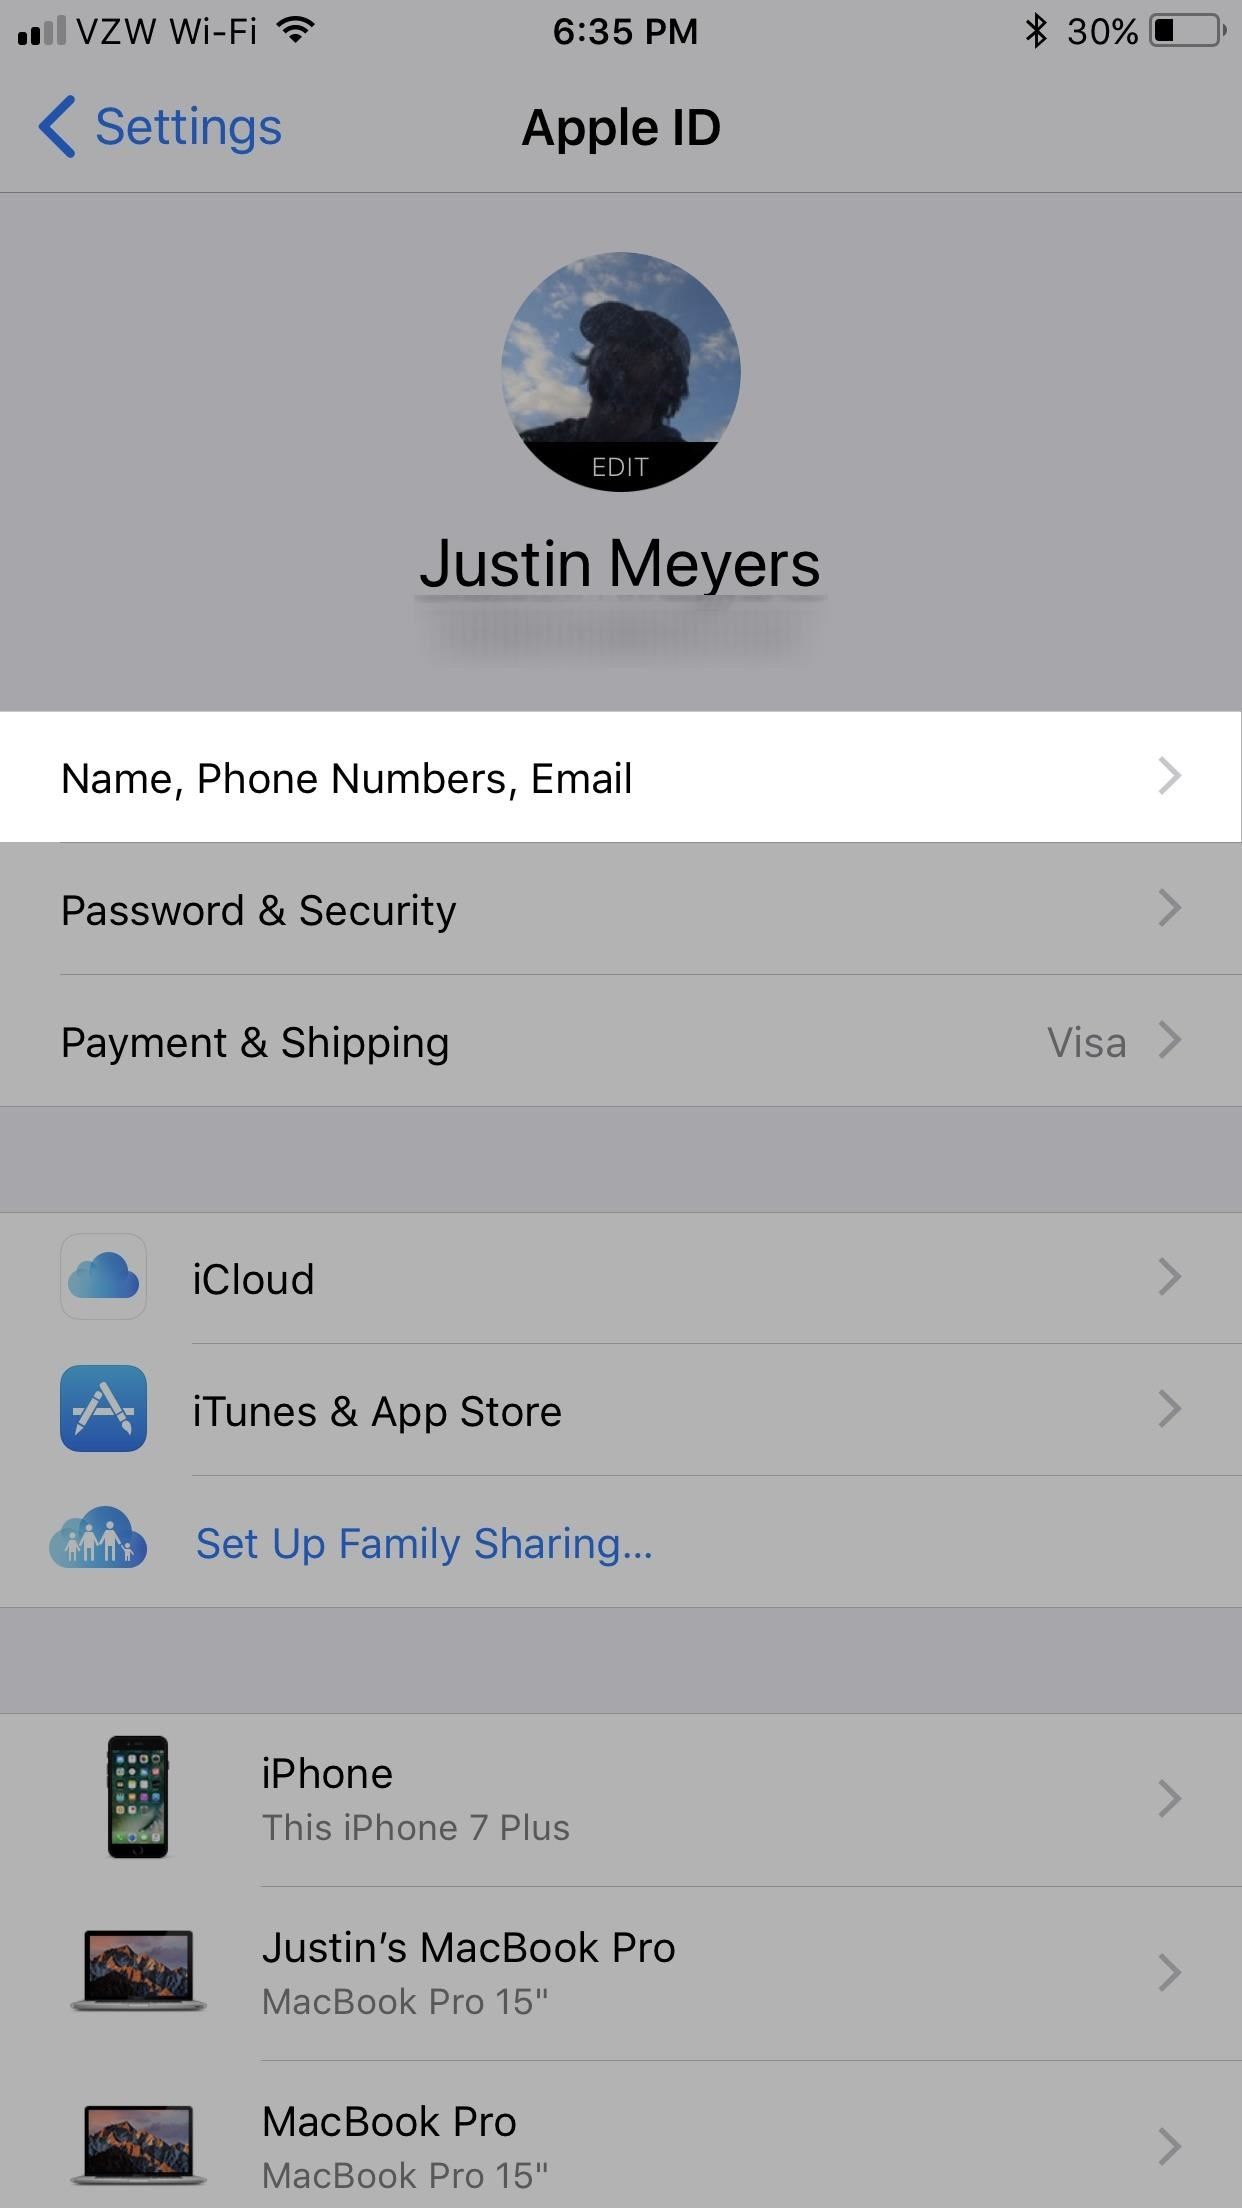 How to Add or Remove Email Addresses to Be Reached At for FaceTime on Your iPhone